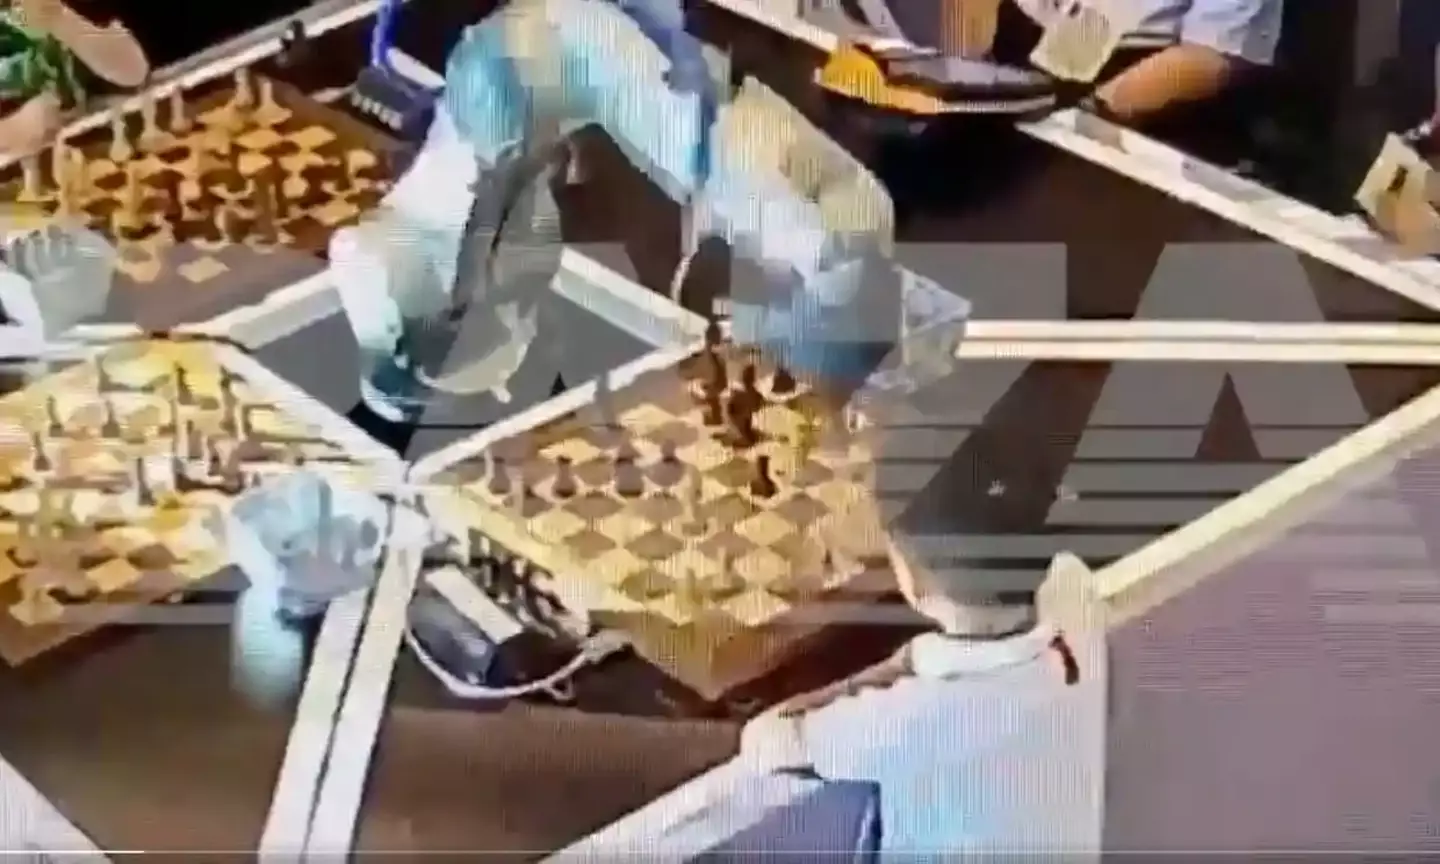 A chess robot broke the finger of a child opponent during a match at the Moscow Open last week.